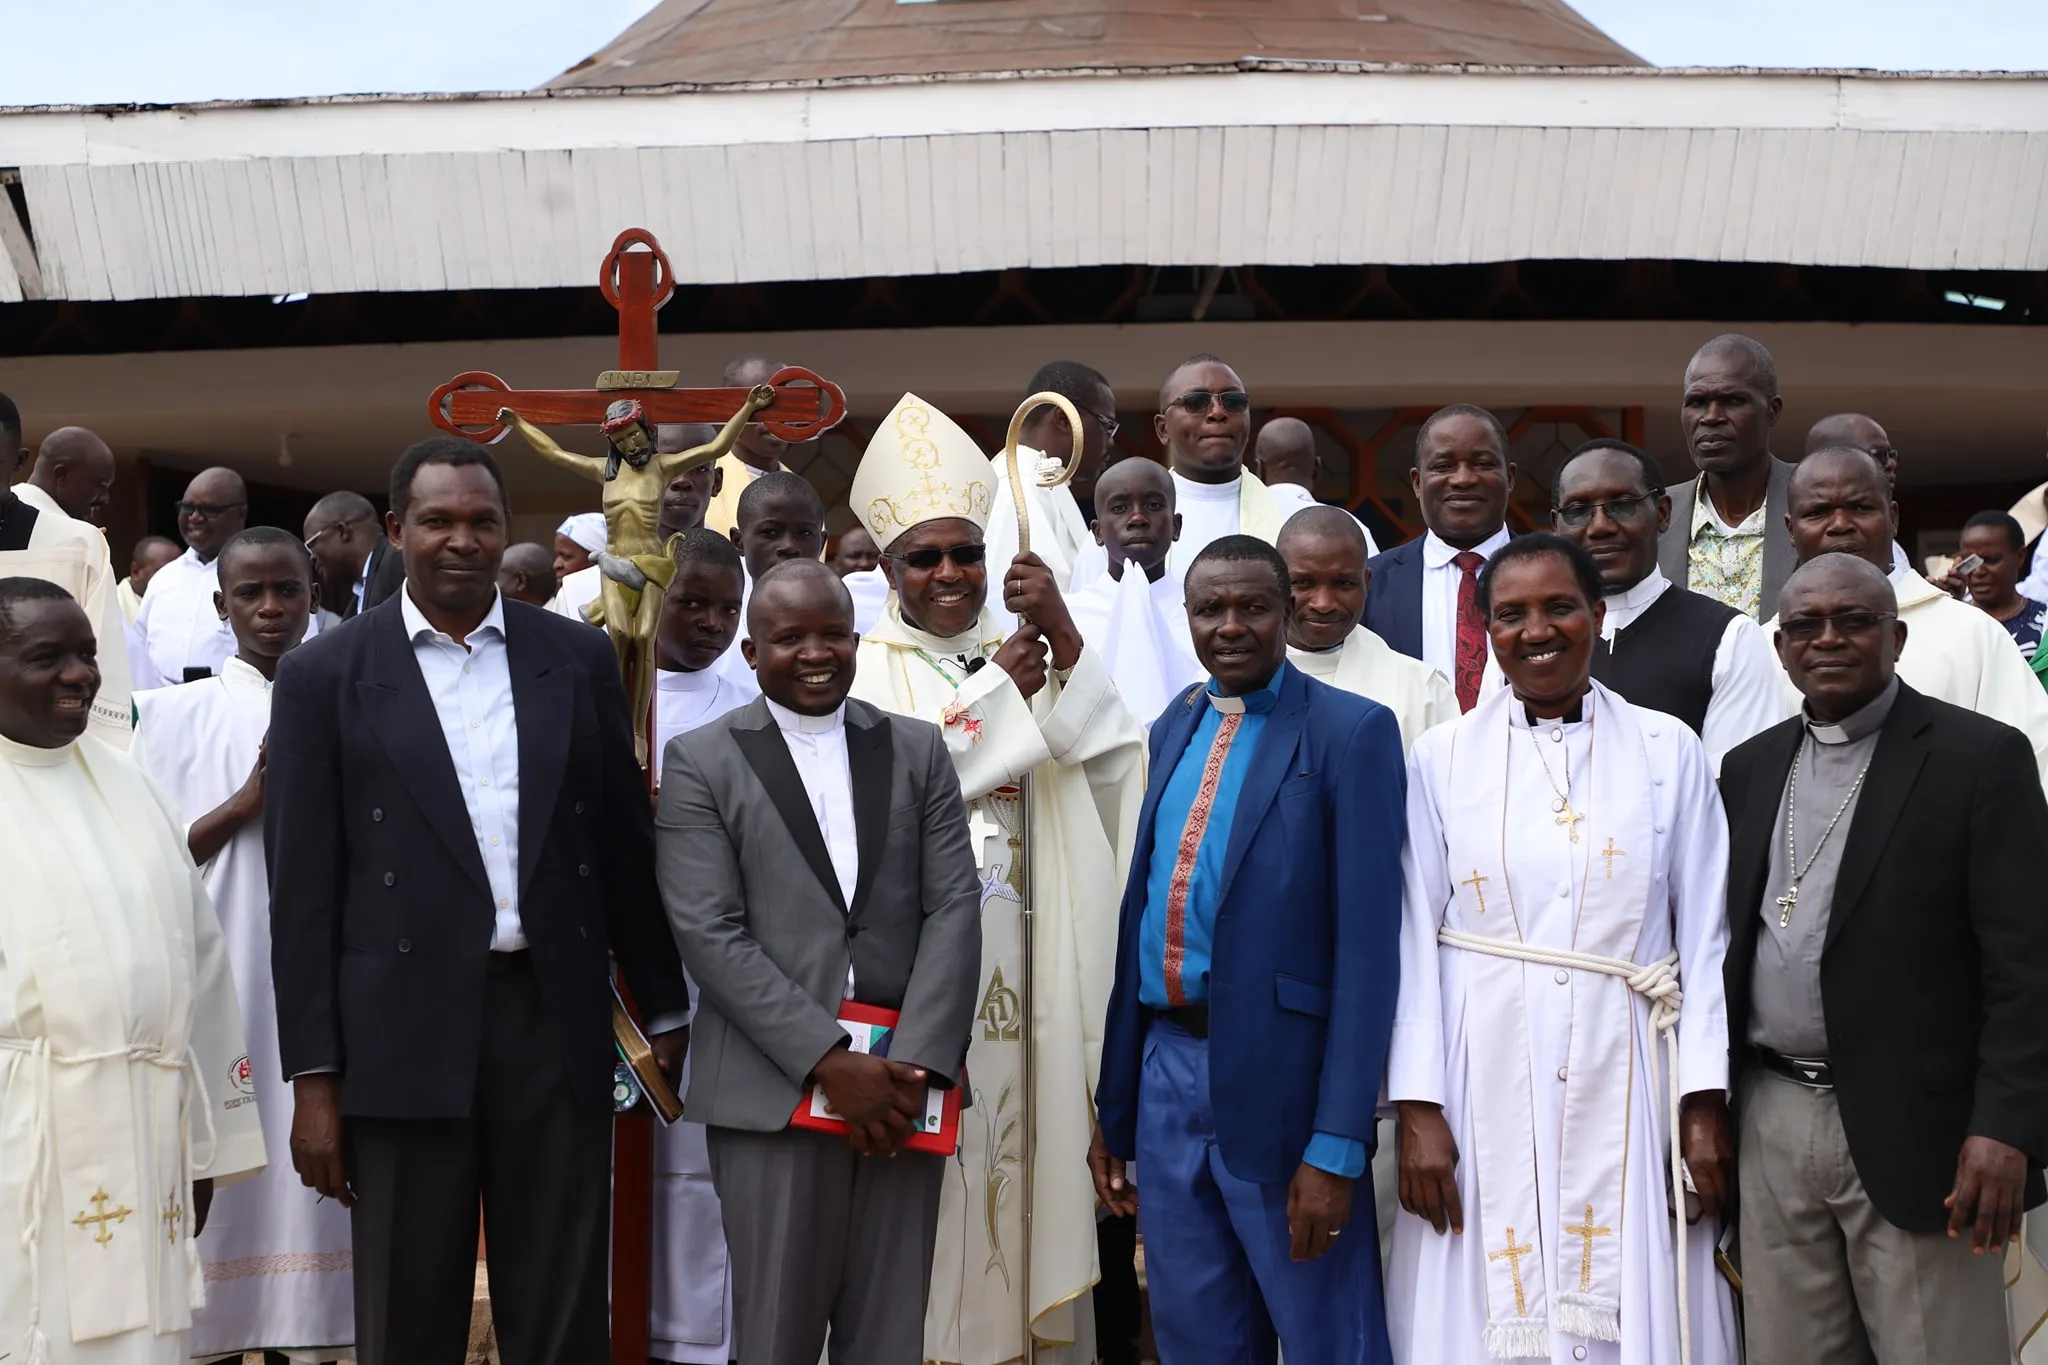 Bishop Michael Cornelius Odiwa and religious leaders after Holy mass. Credit: Homabay Diocese